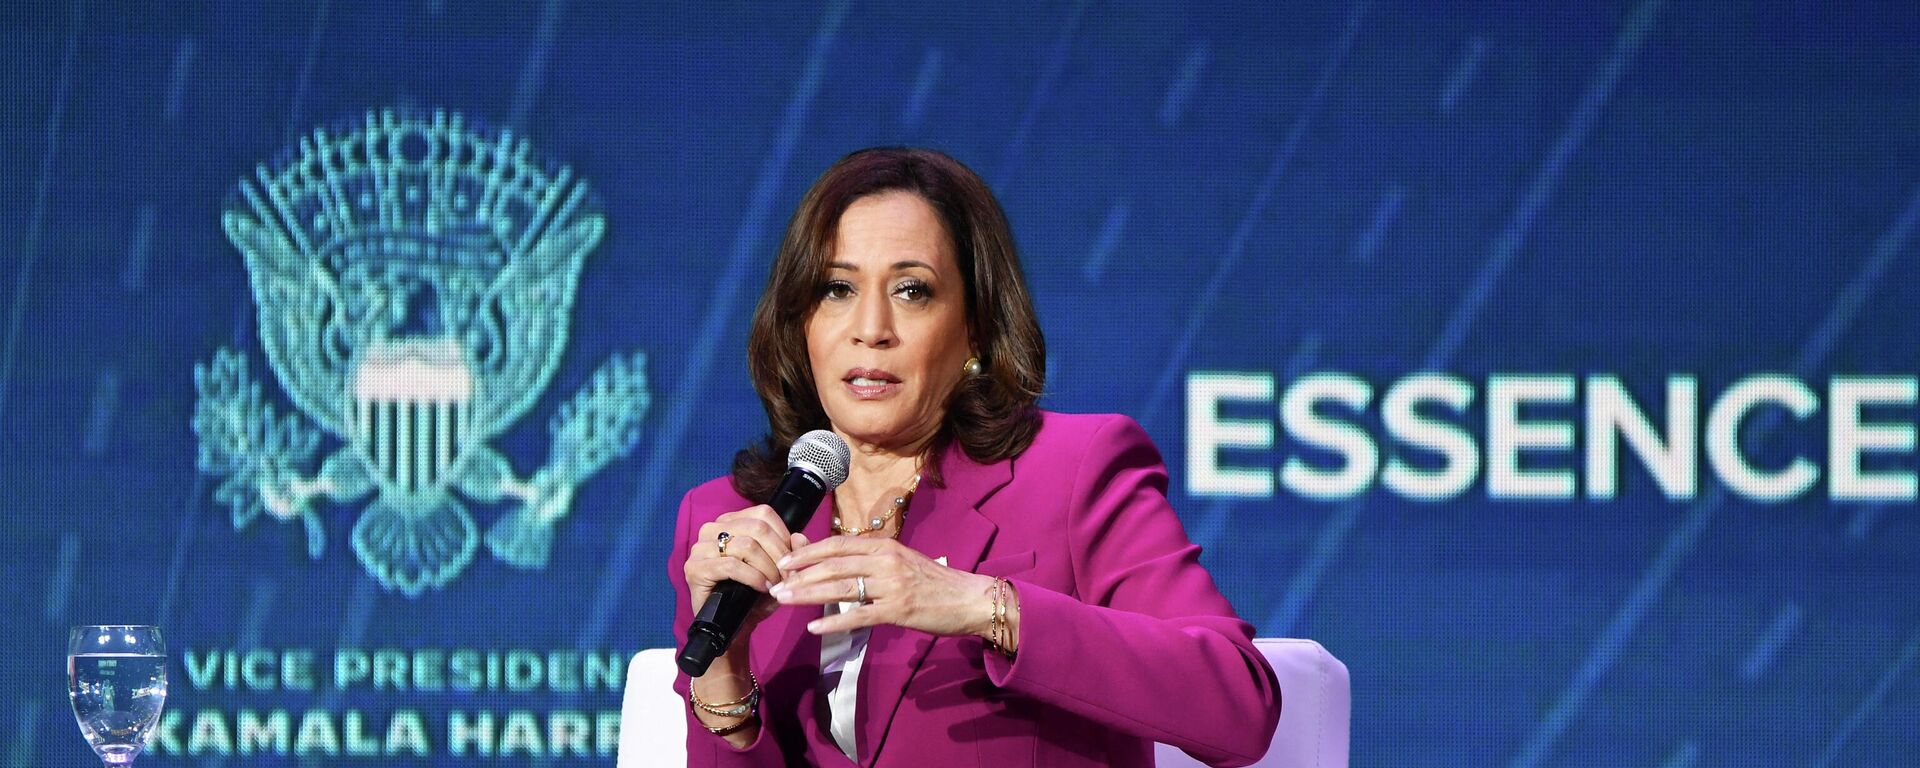 Vice President of the United States Kamala Harris speaks onstage during the 2022 Essence Festival of Culture at the Ernest N. Morial Convention Center on July 2, 2022 in New Orleans, Louisiana. - Sputnik International, 1920, 03.07.2022